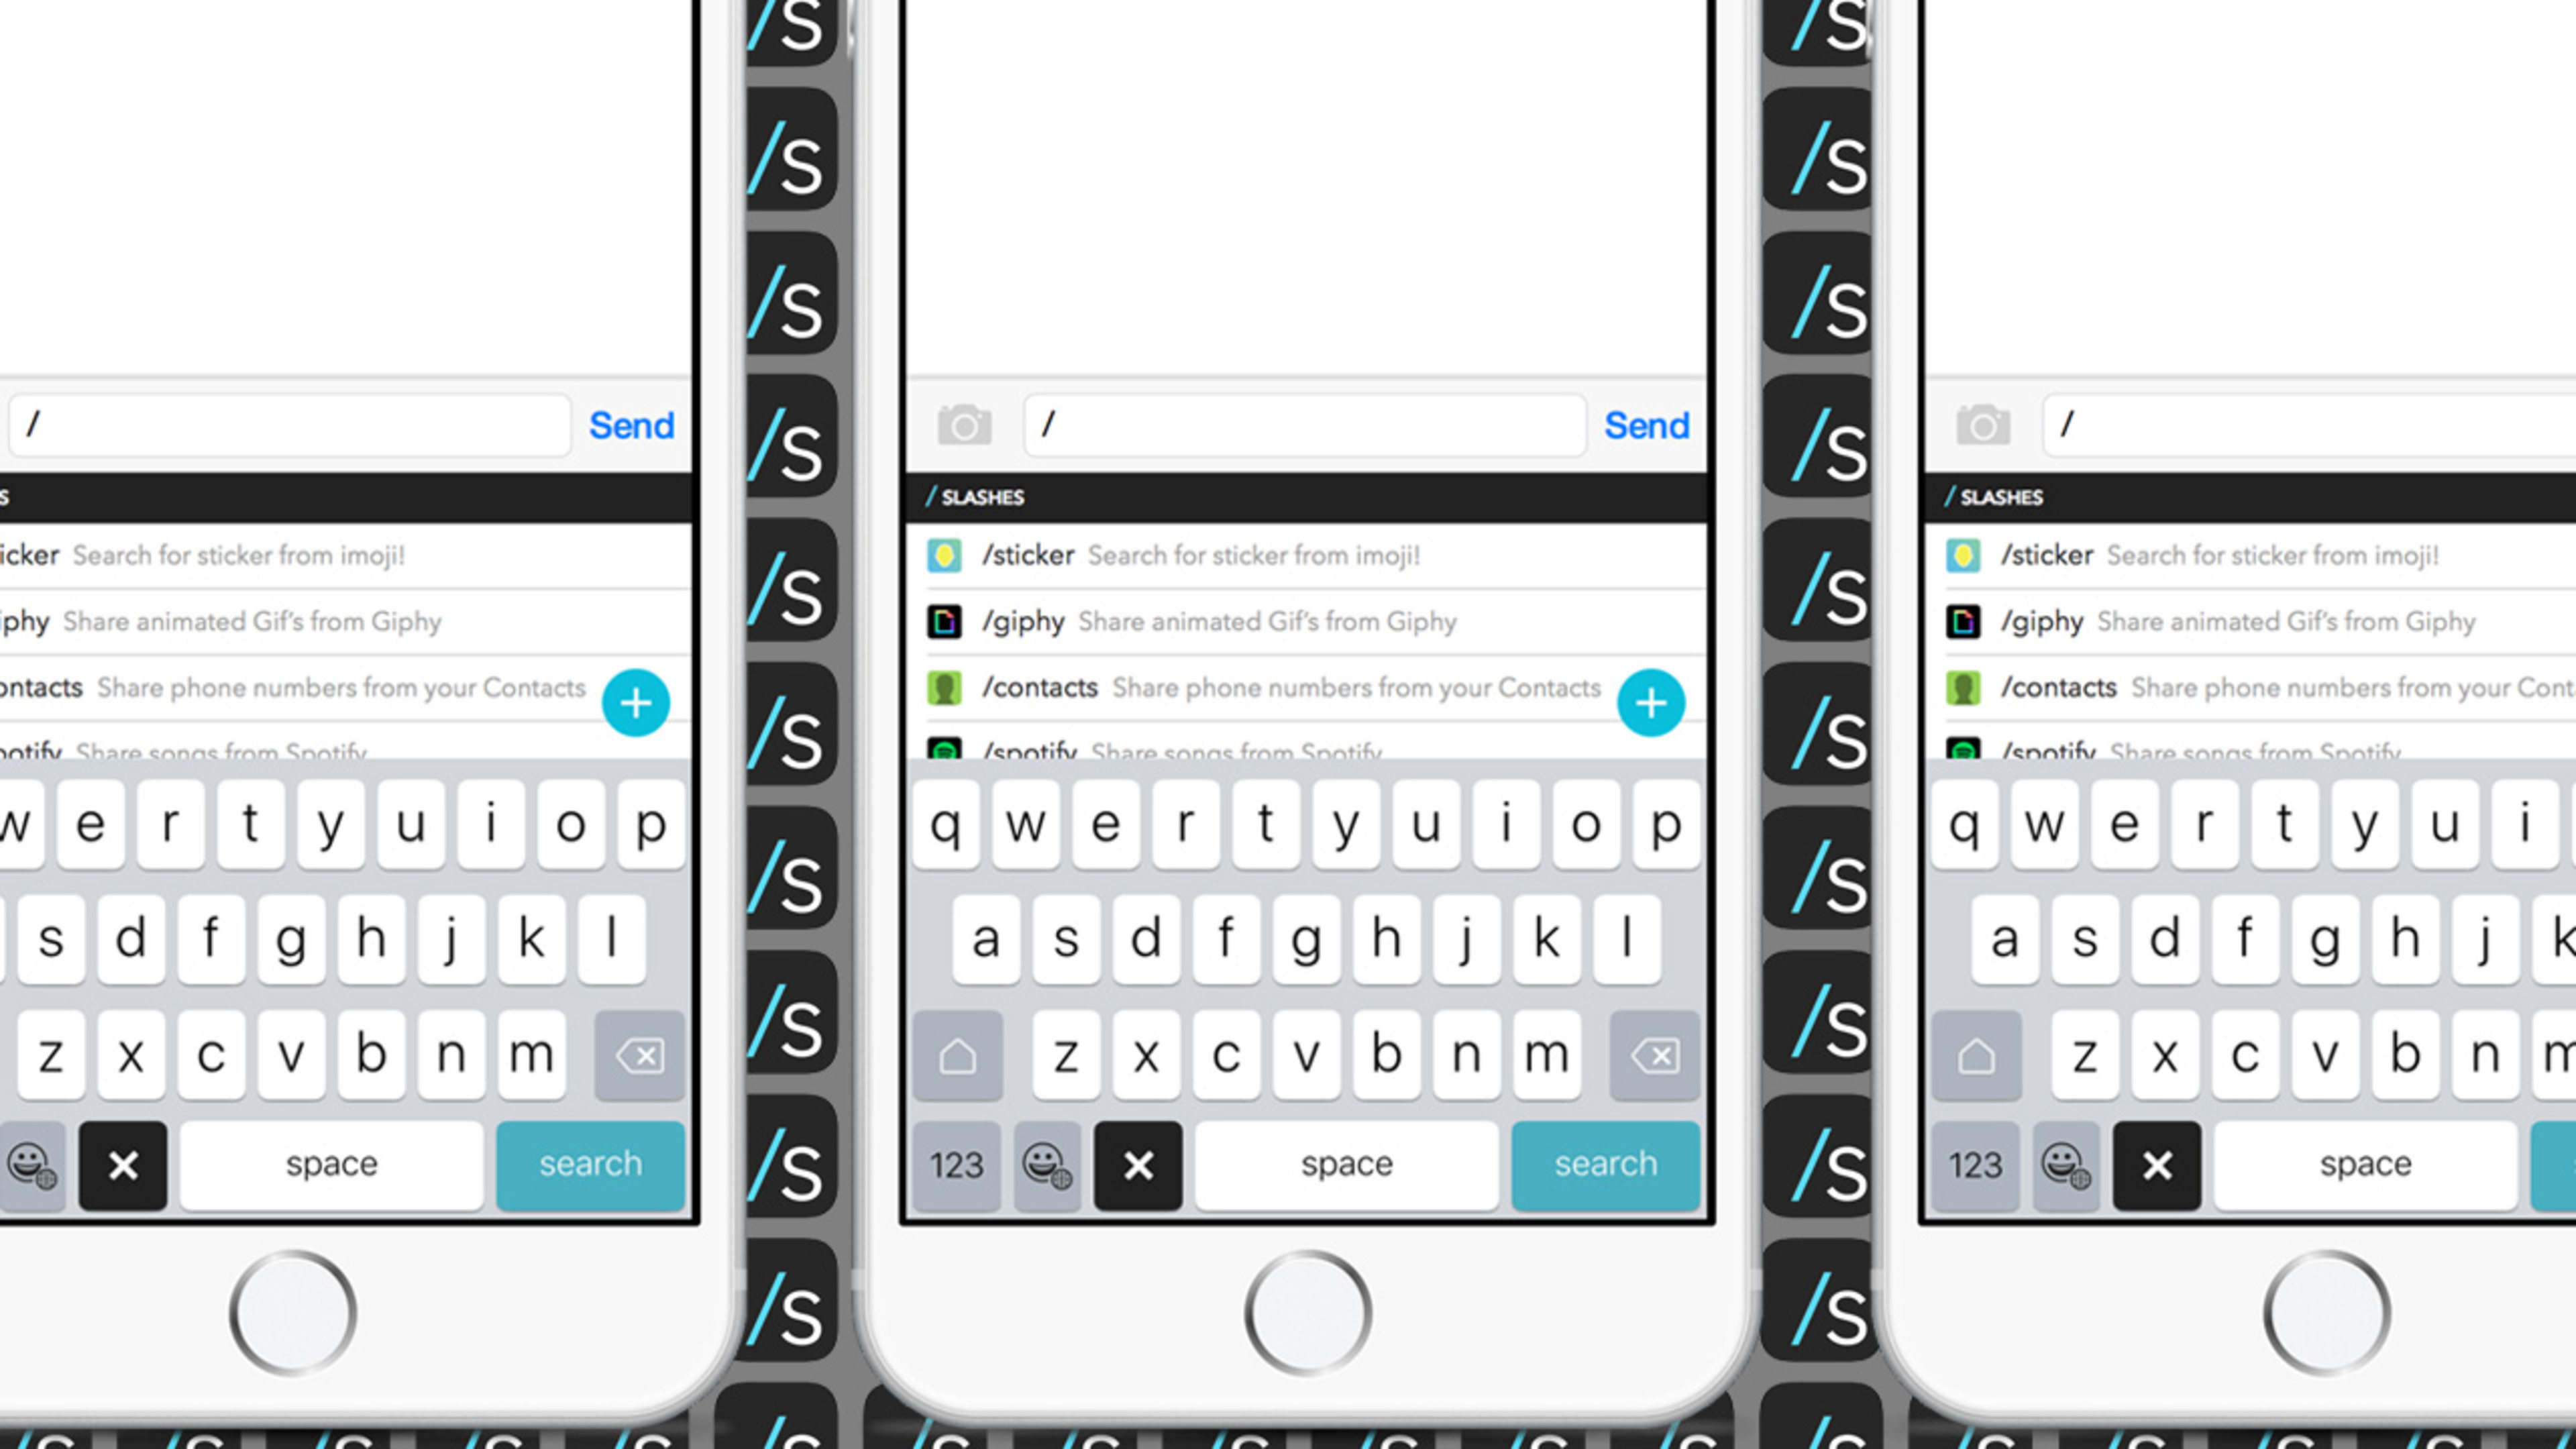 Slash’s Mobile Keyboard Makes It An Interesting Player In The Messaging Wars